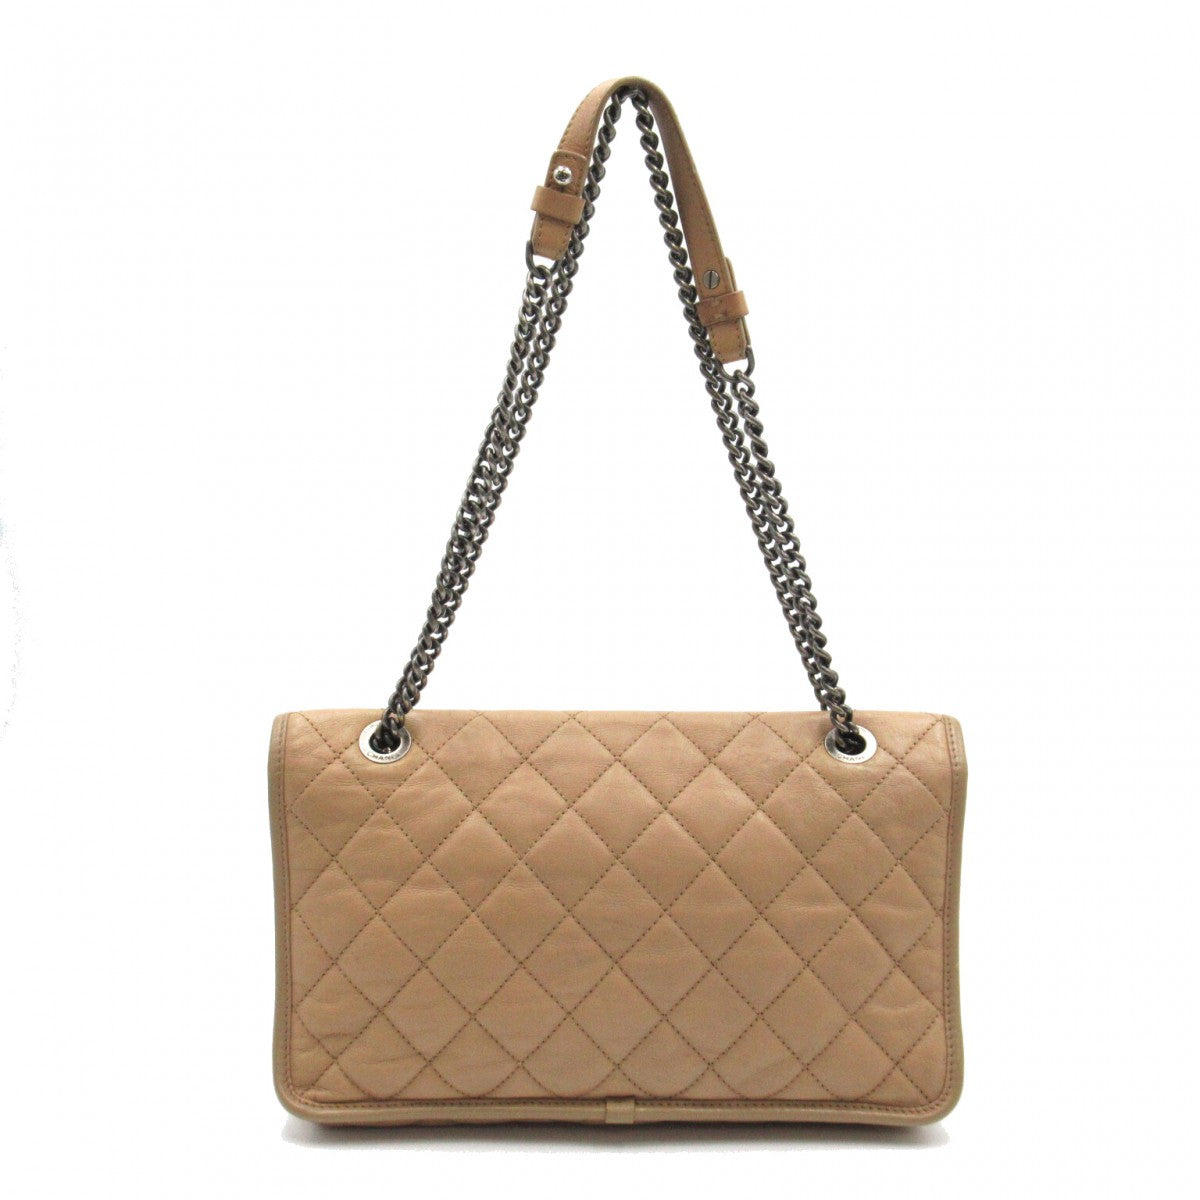 CC Quilted Leather French Riviera Flap Bag